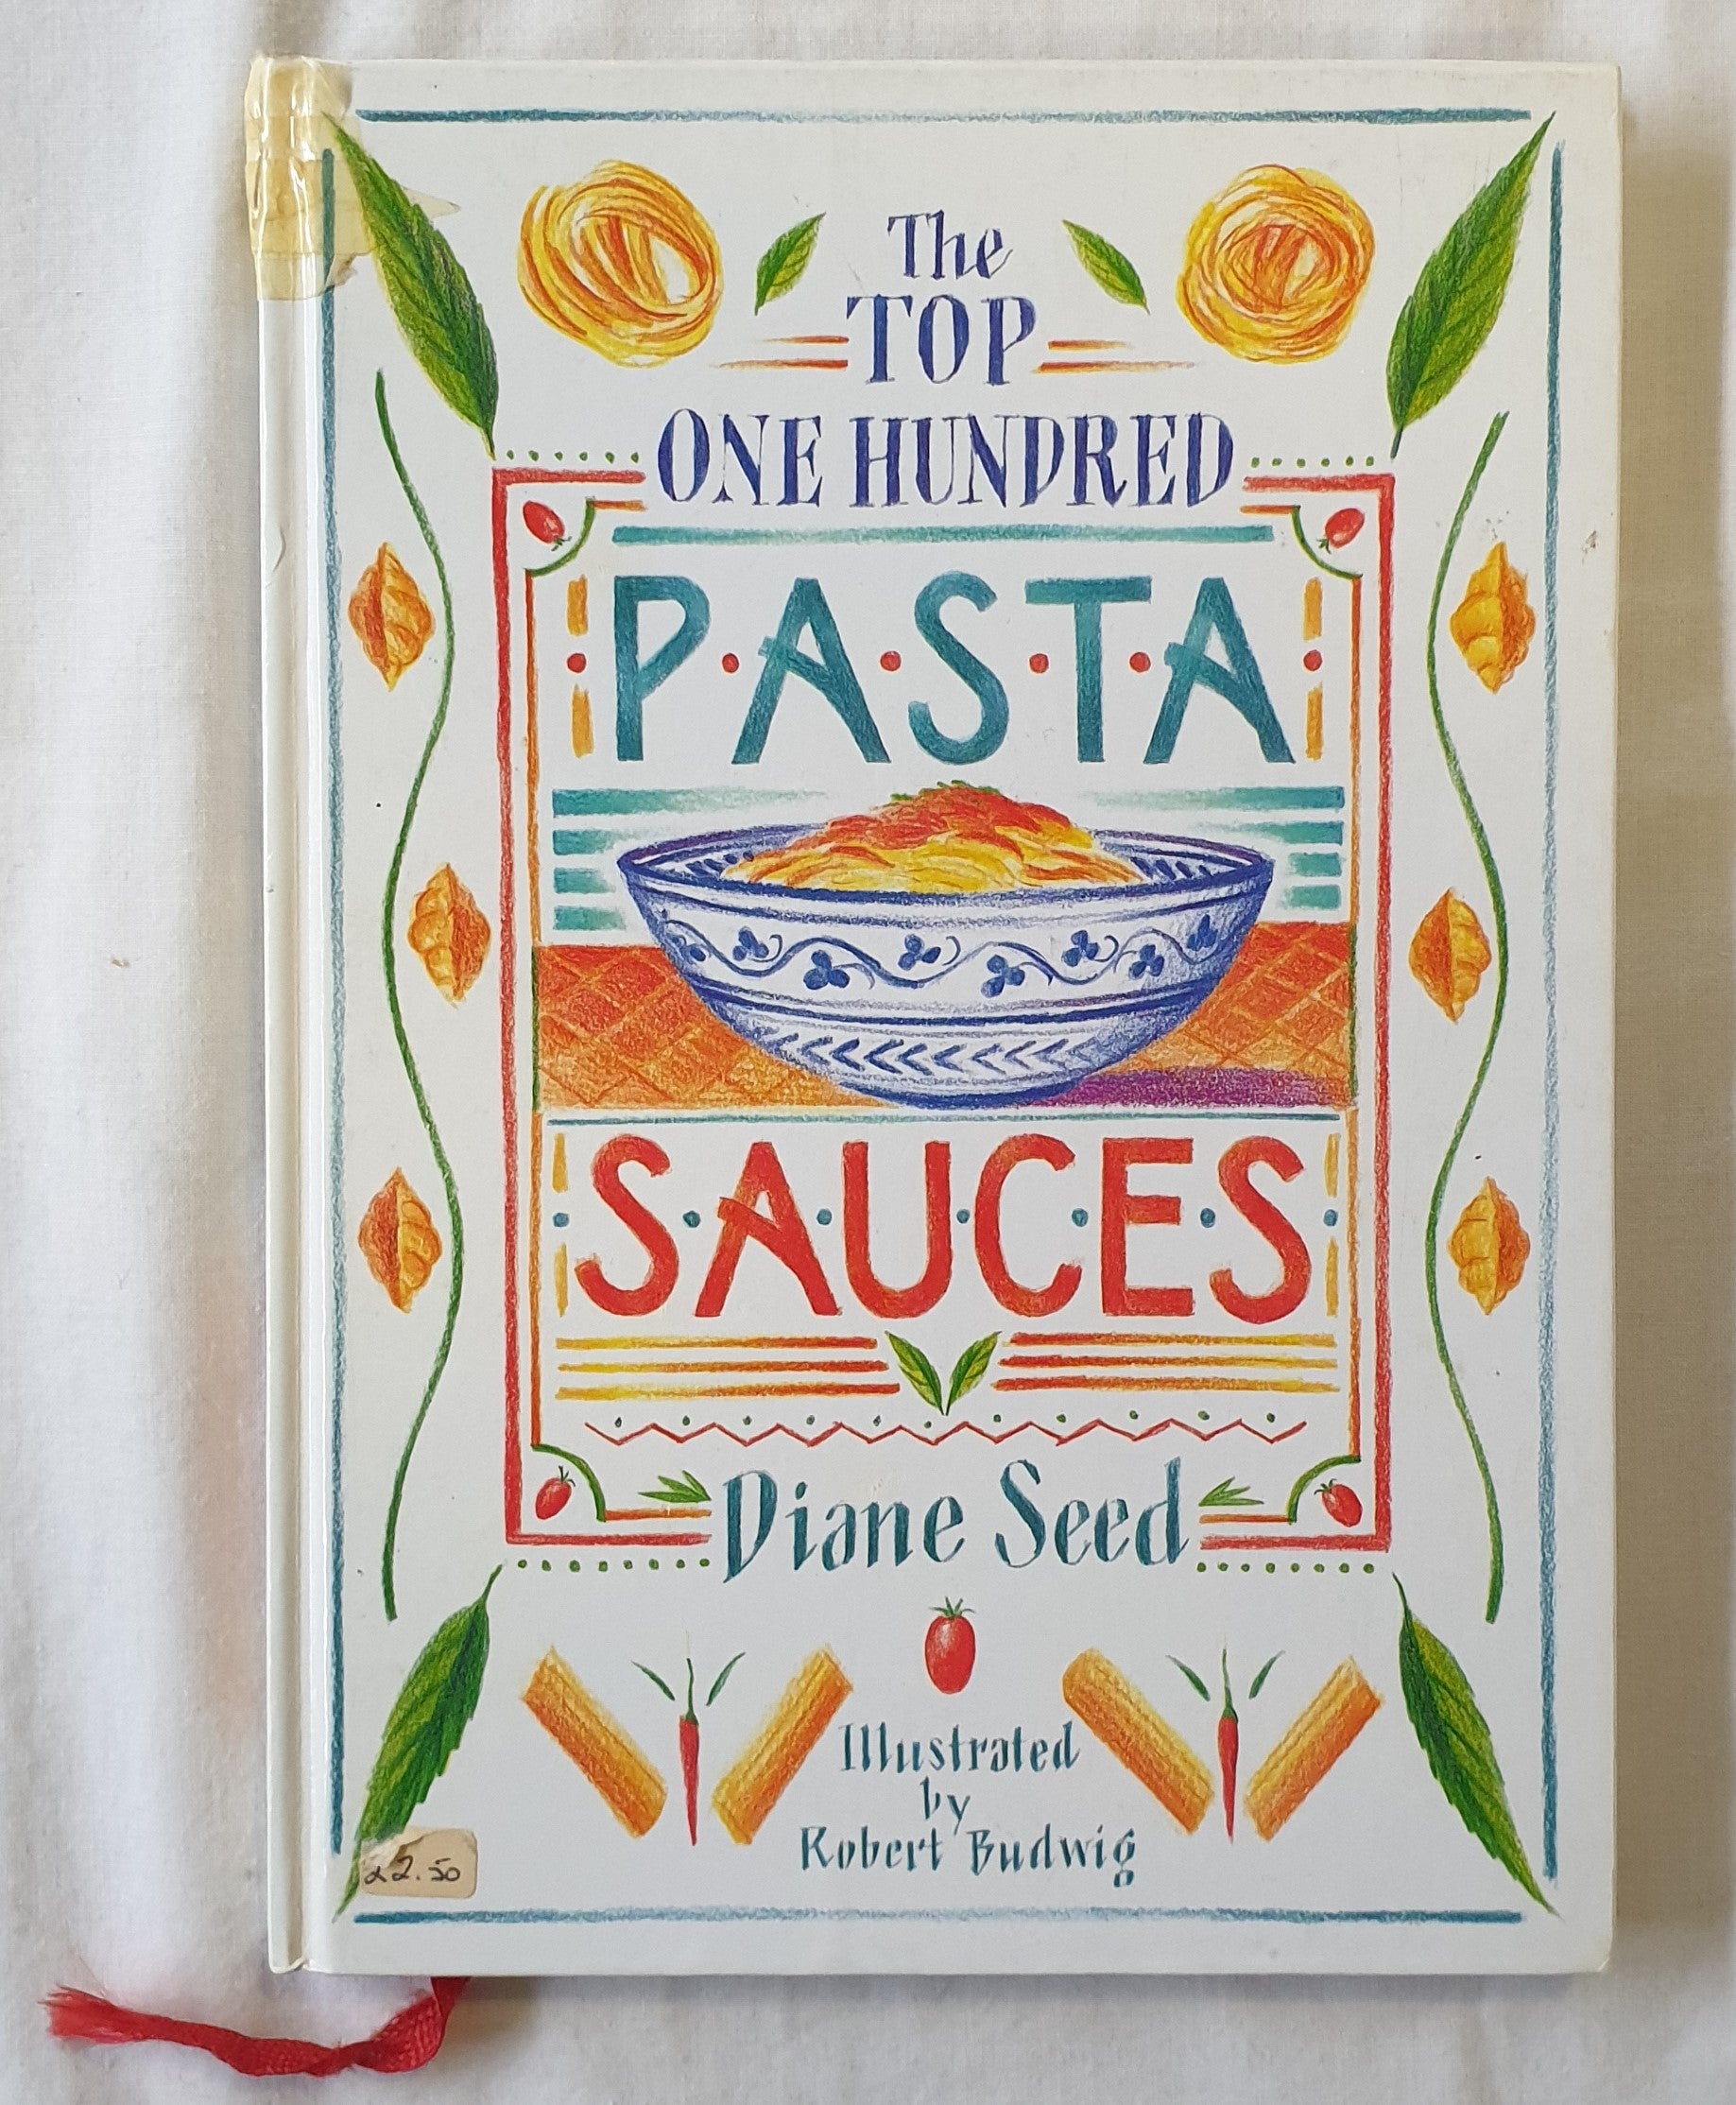 The Top One Hundred Pasta Sauces  by Diane Seed